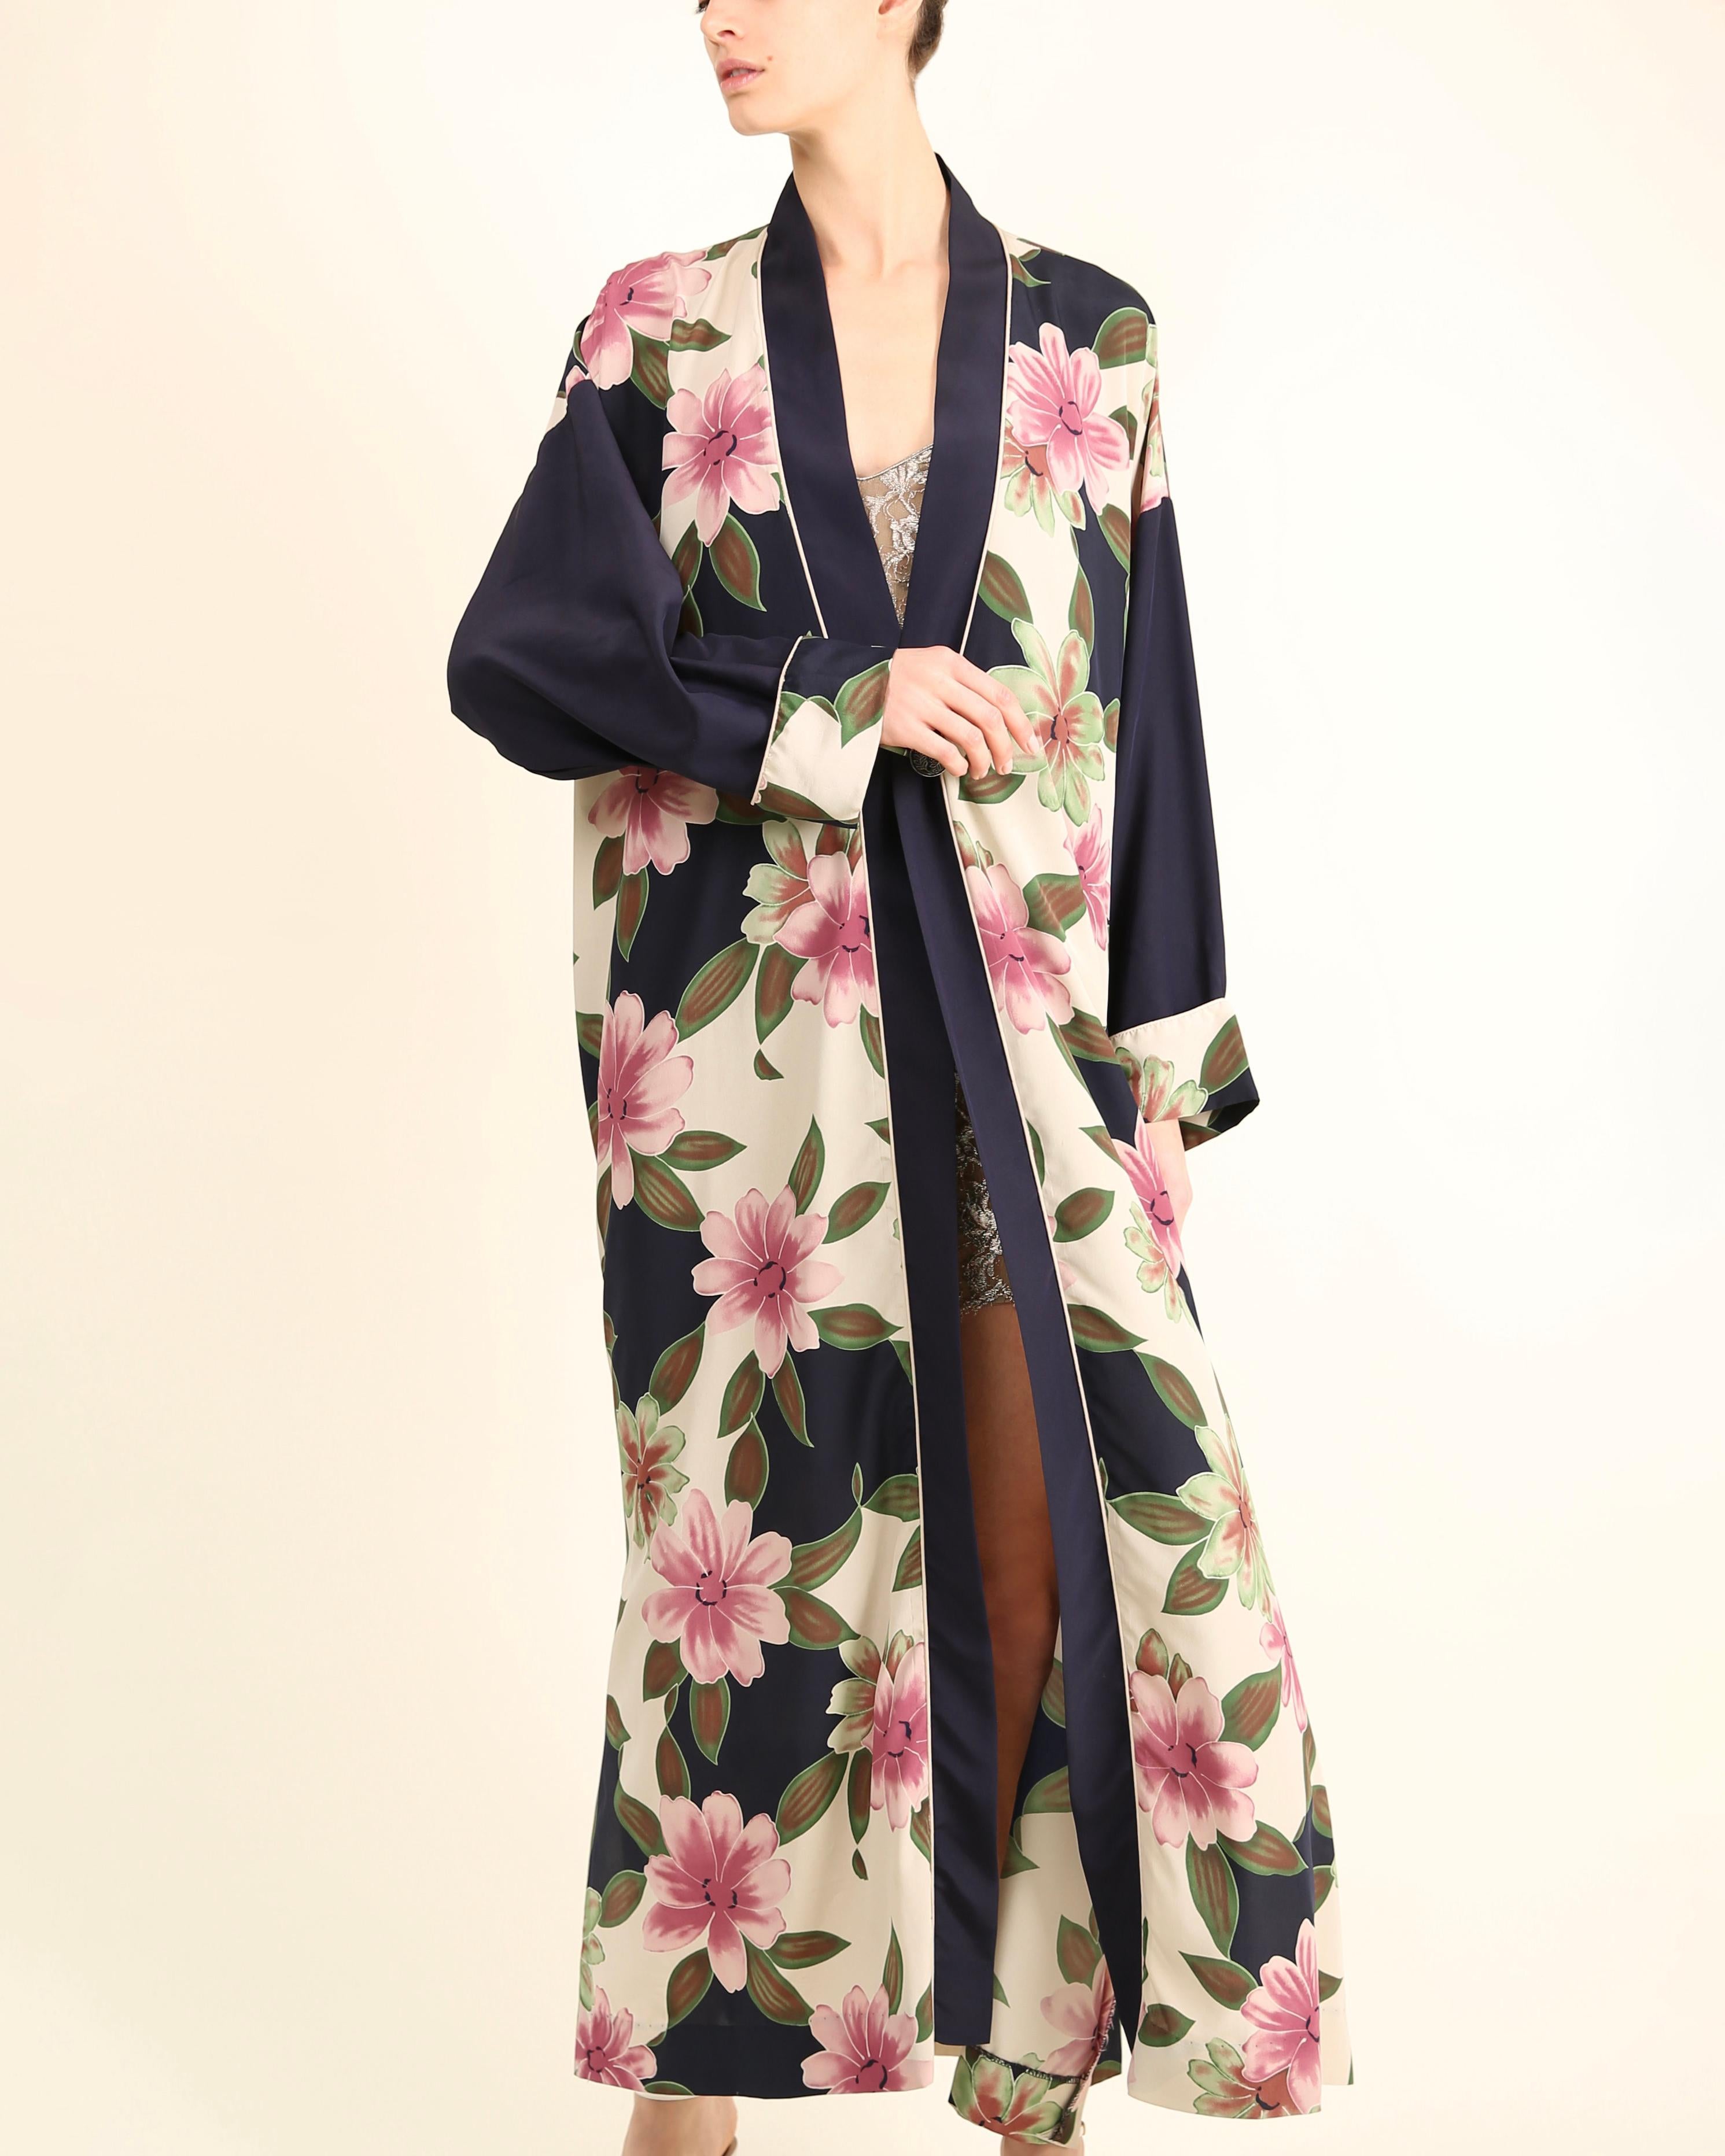 Christian Dior vintage navy pink floral oversized dress coat night gown robe For Sale 4